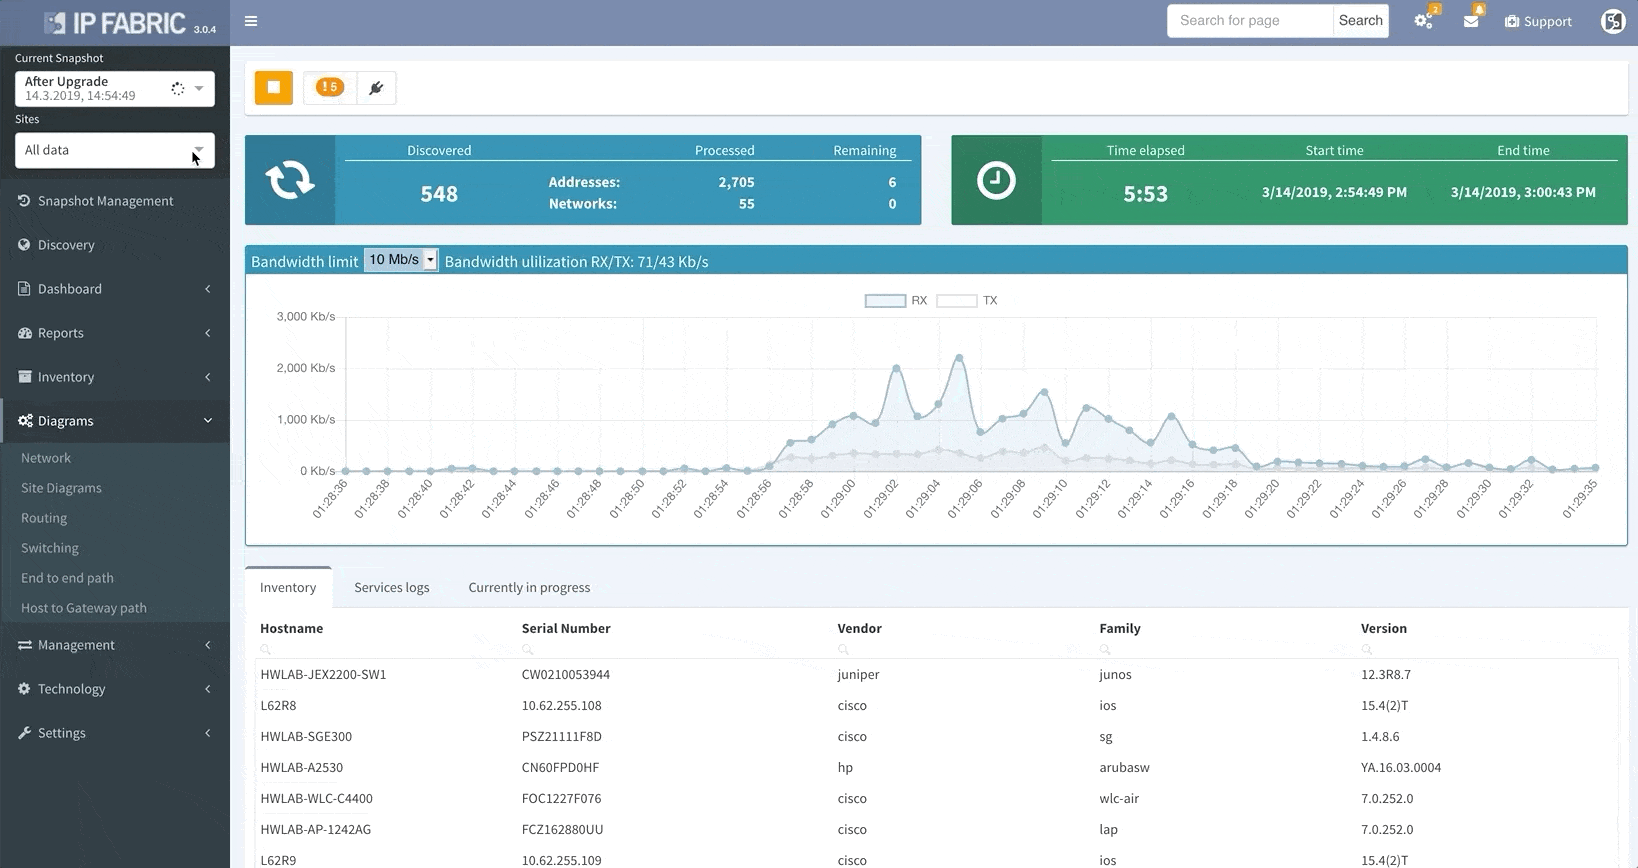 Platform snapshot availability during running discovery